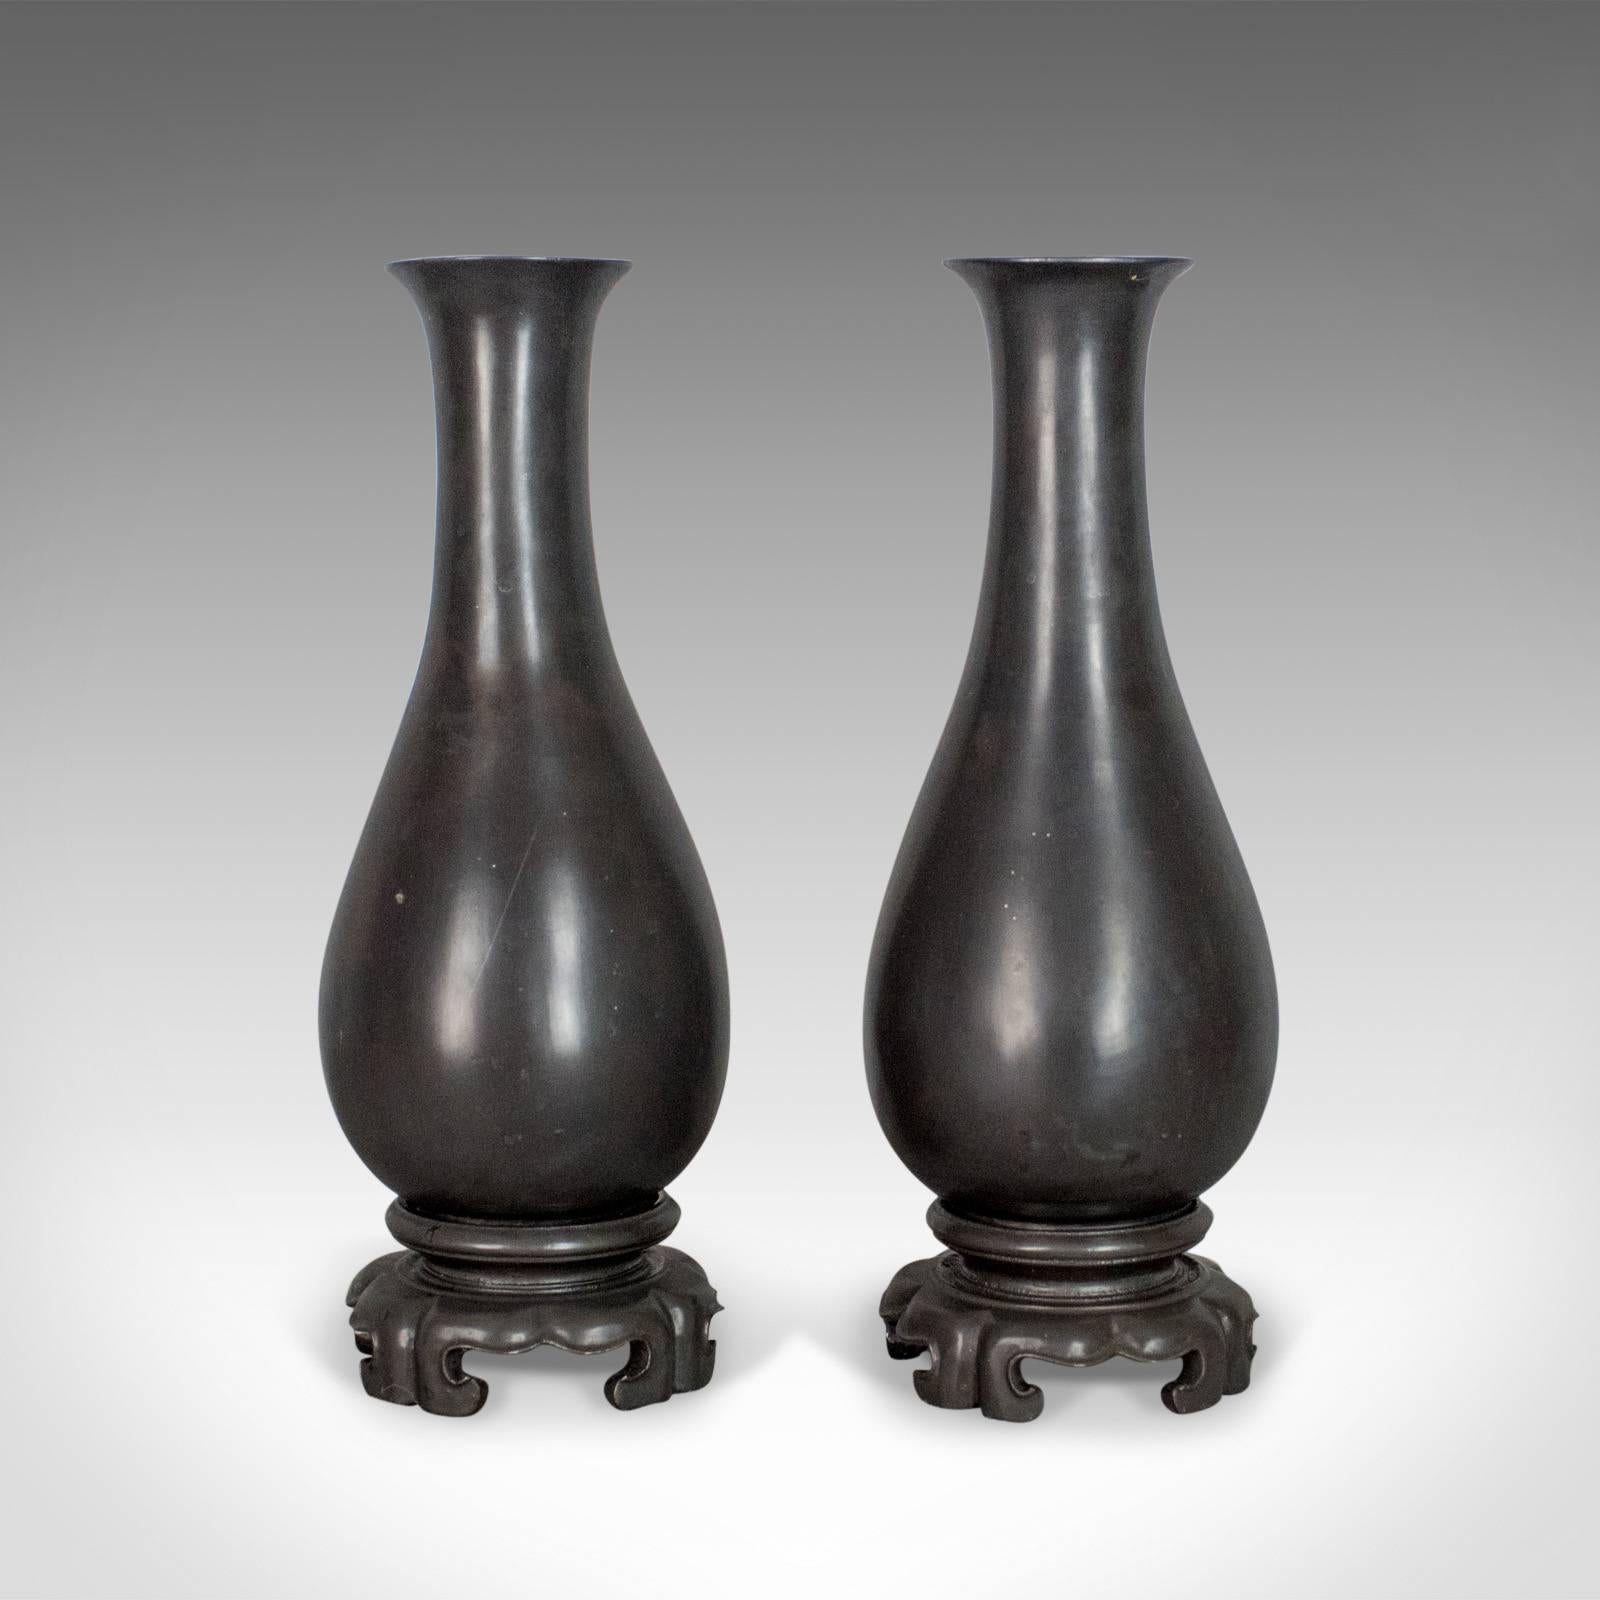 This is a pair of lacquerware vases, Chinese 'bodiless' stem vases hand decorated with silver dragons on a black ground.

A fine pair of lacquerware stem vases
Characteristically lightweight with an attractive lustre
Profusely and expertly hand